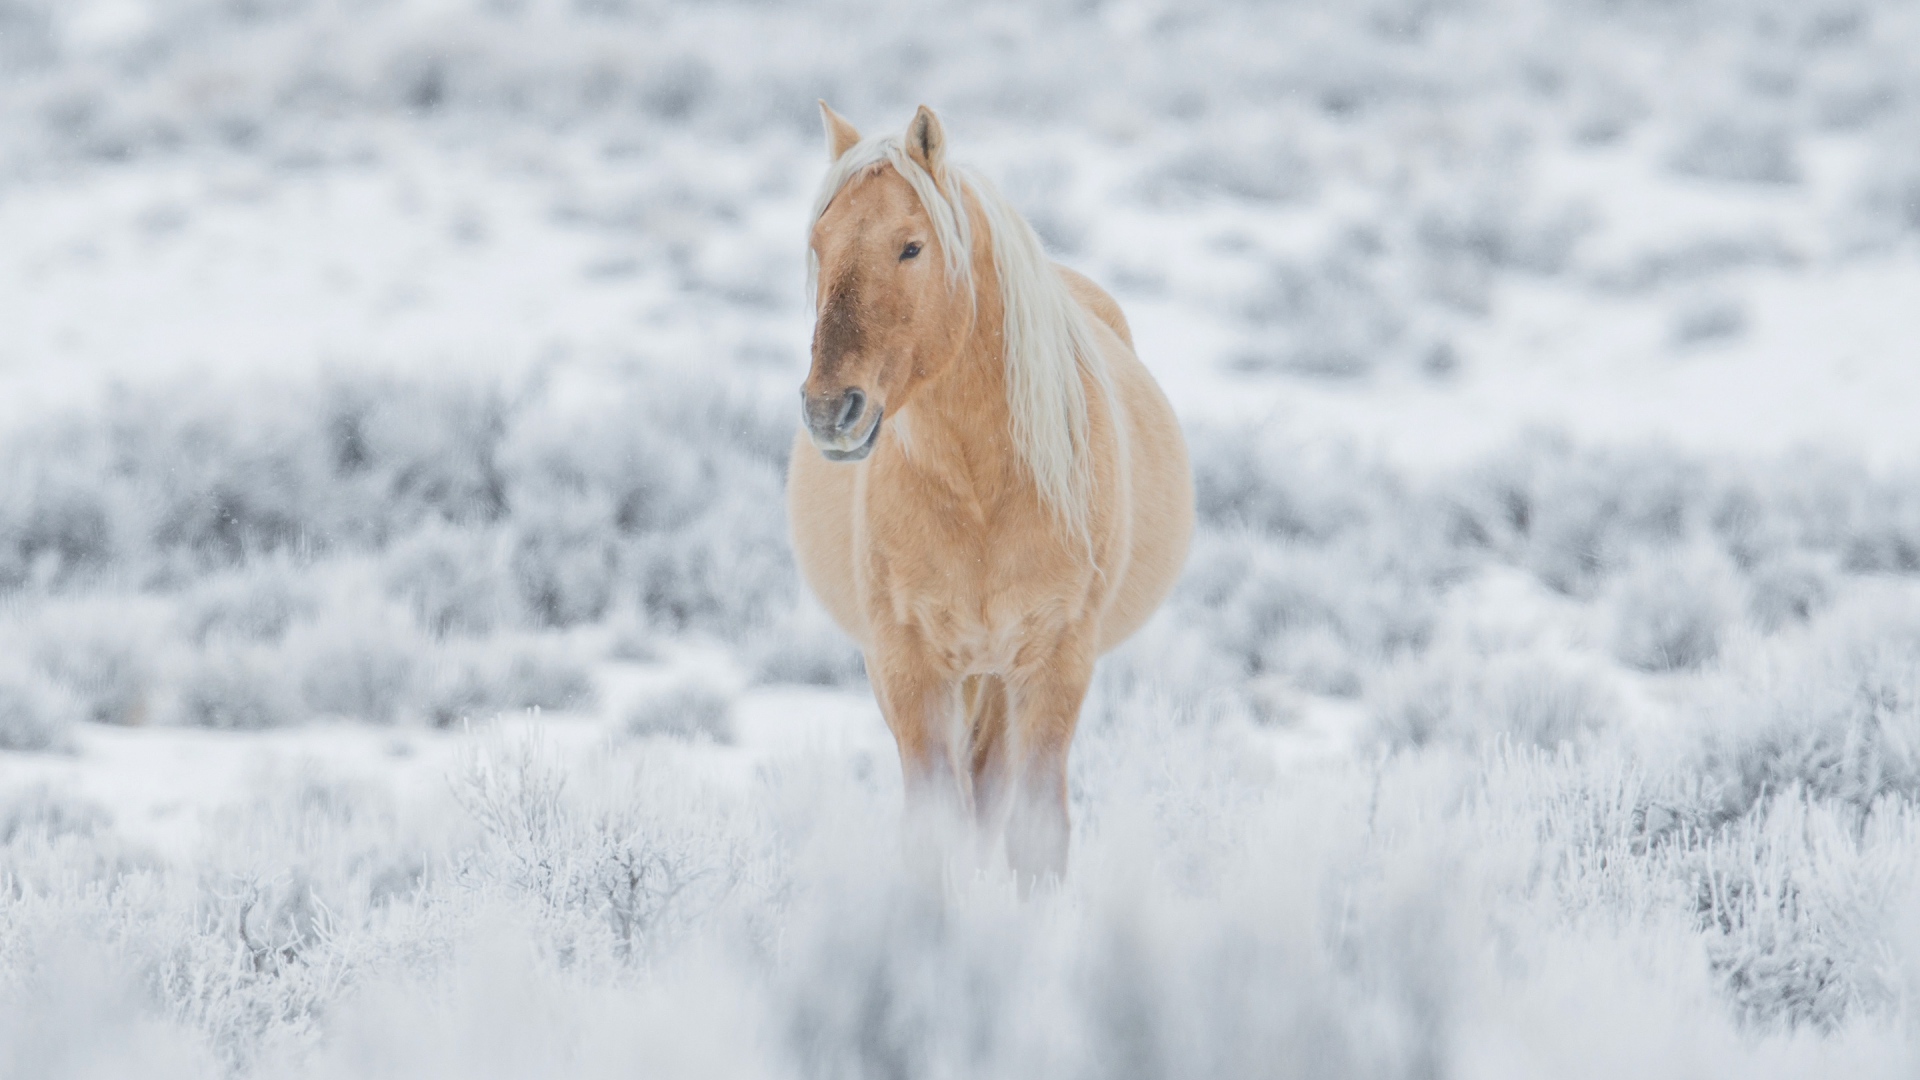 Big brown horse walks on snow-covered grass